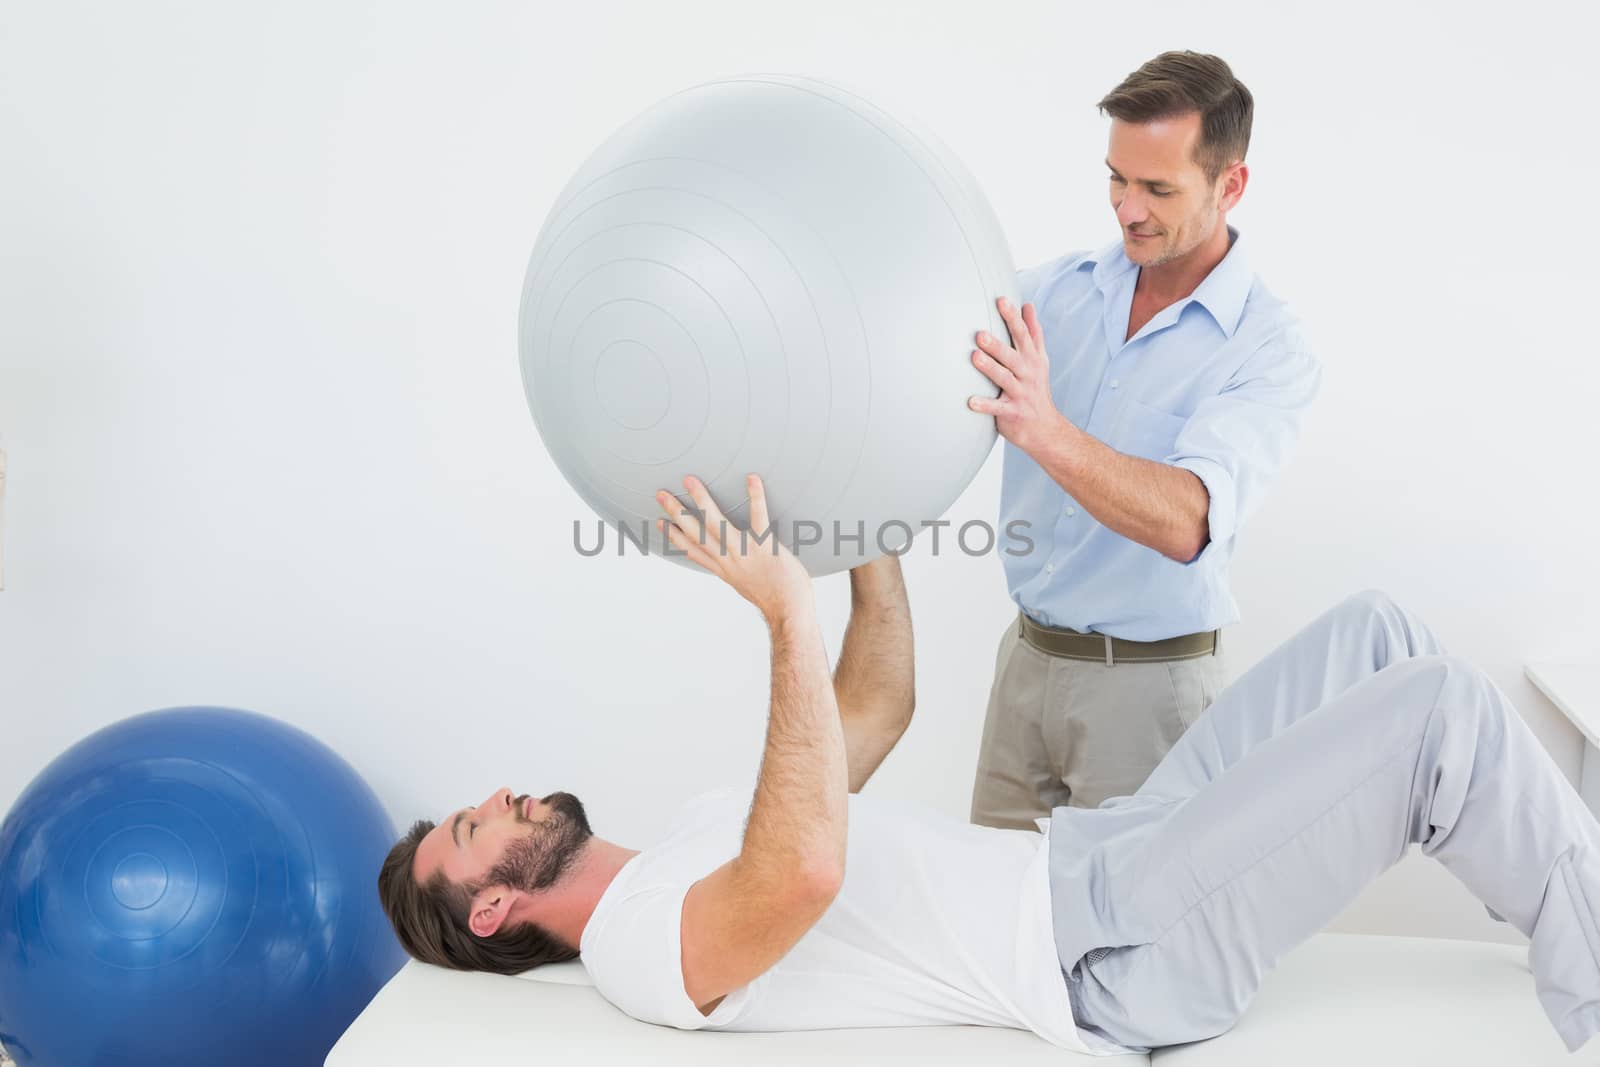 Physical therapist assisting man with yoga ball by Wavebreakmedia